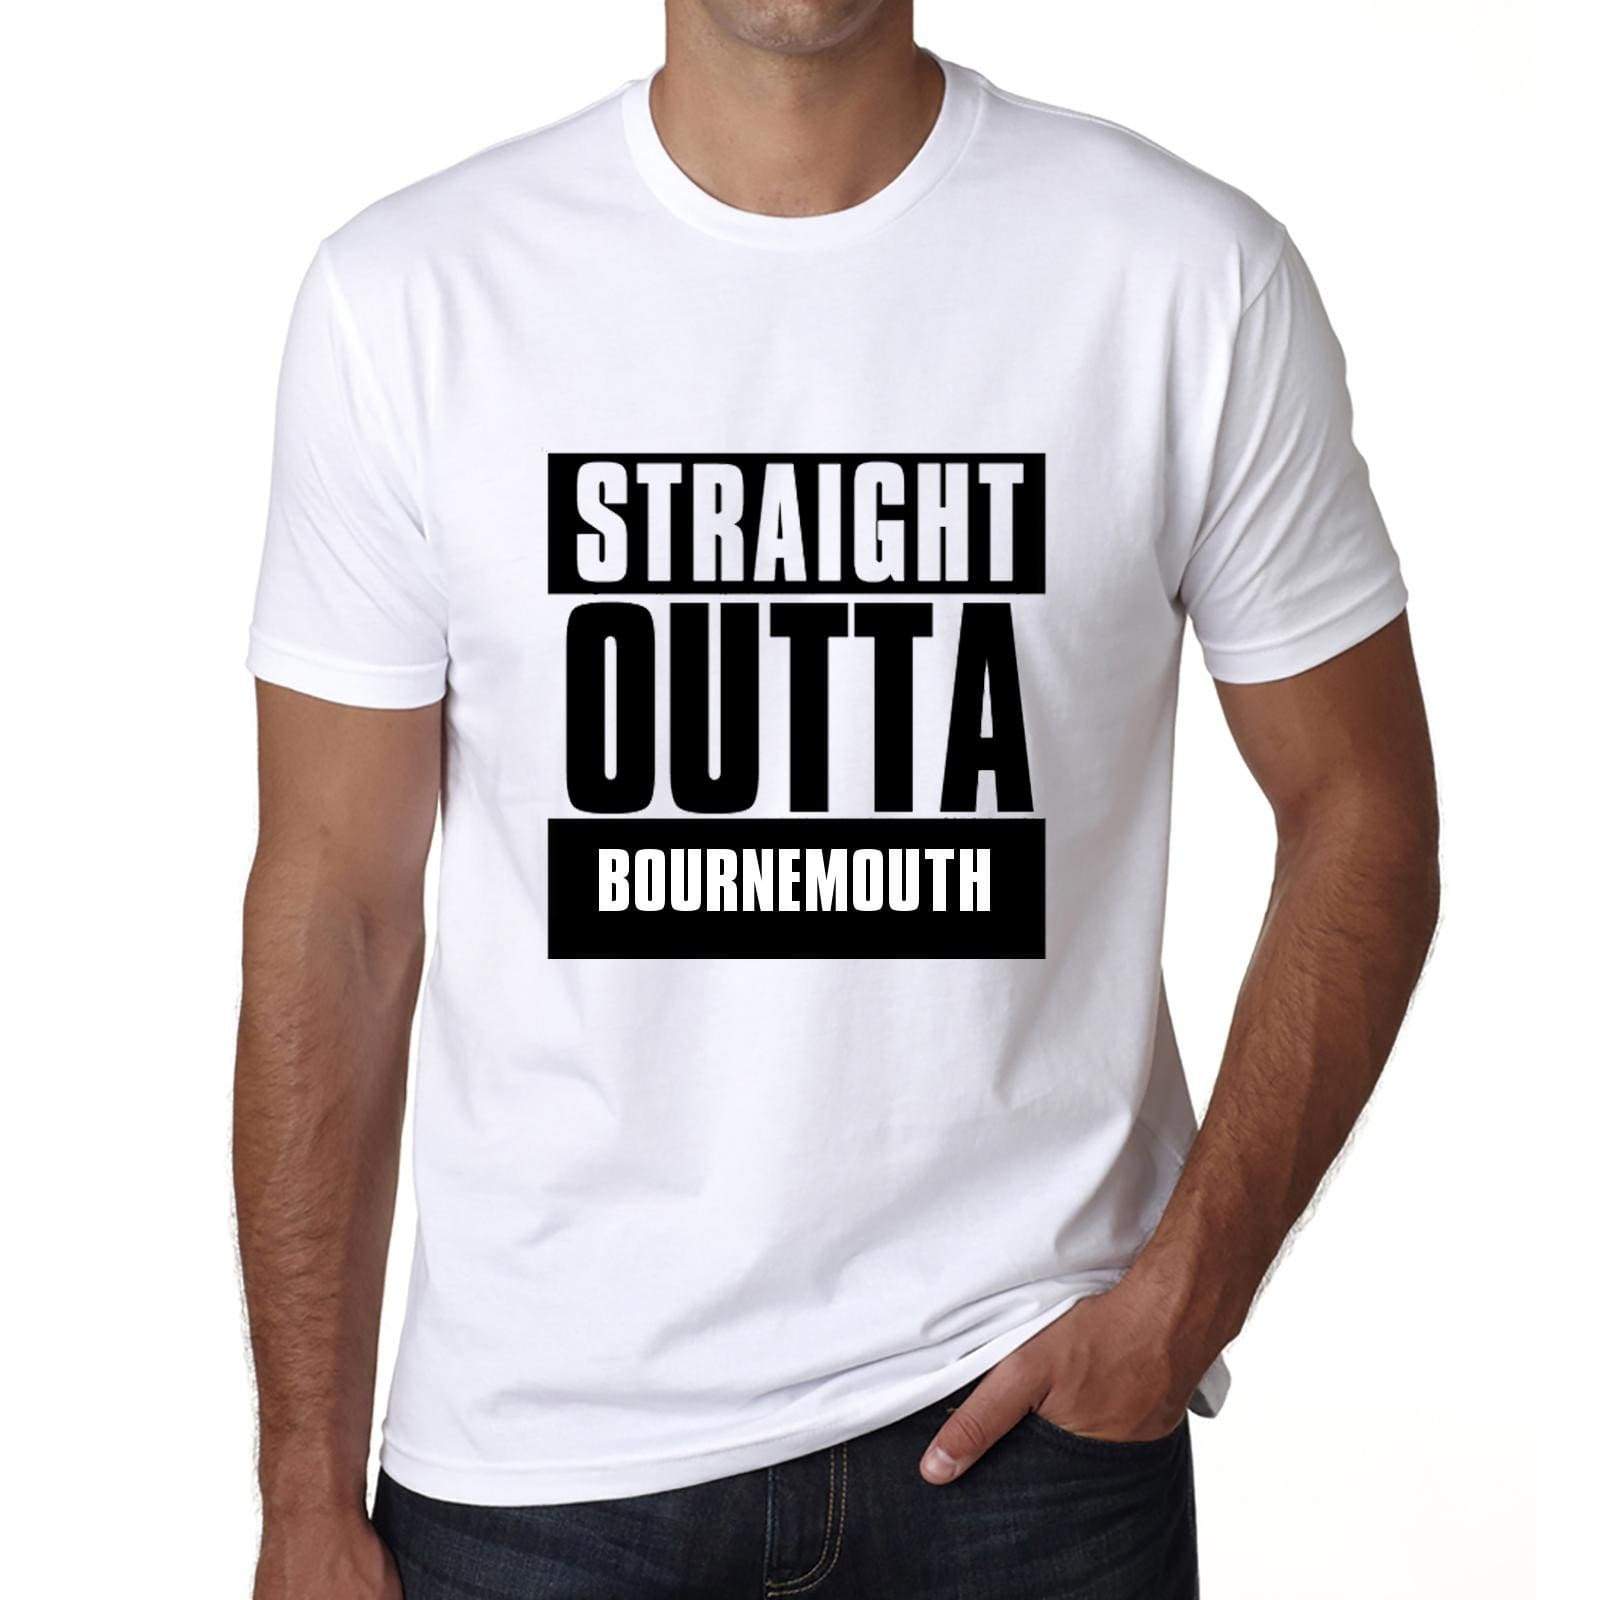 Straight Outta Bournemouth Mens Short Sleeve Round Neck T-Shirt 00027 - White / S - Casual